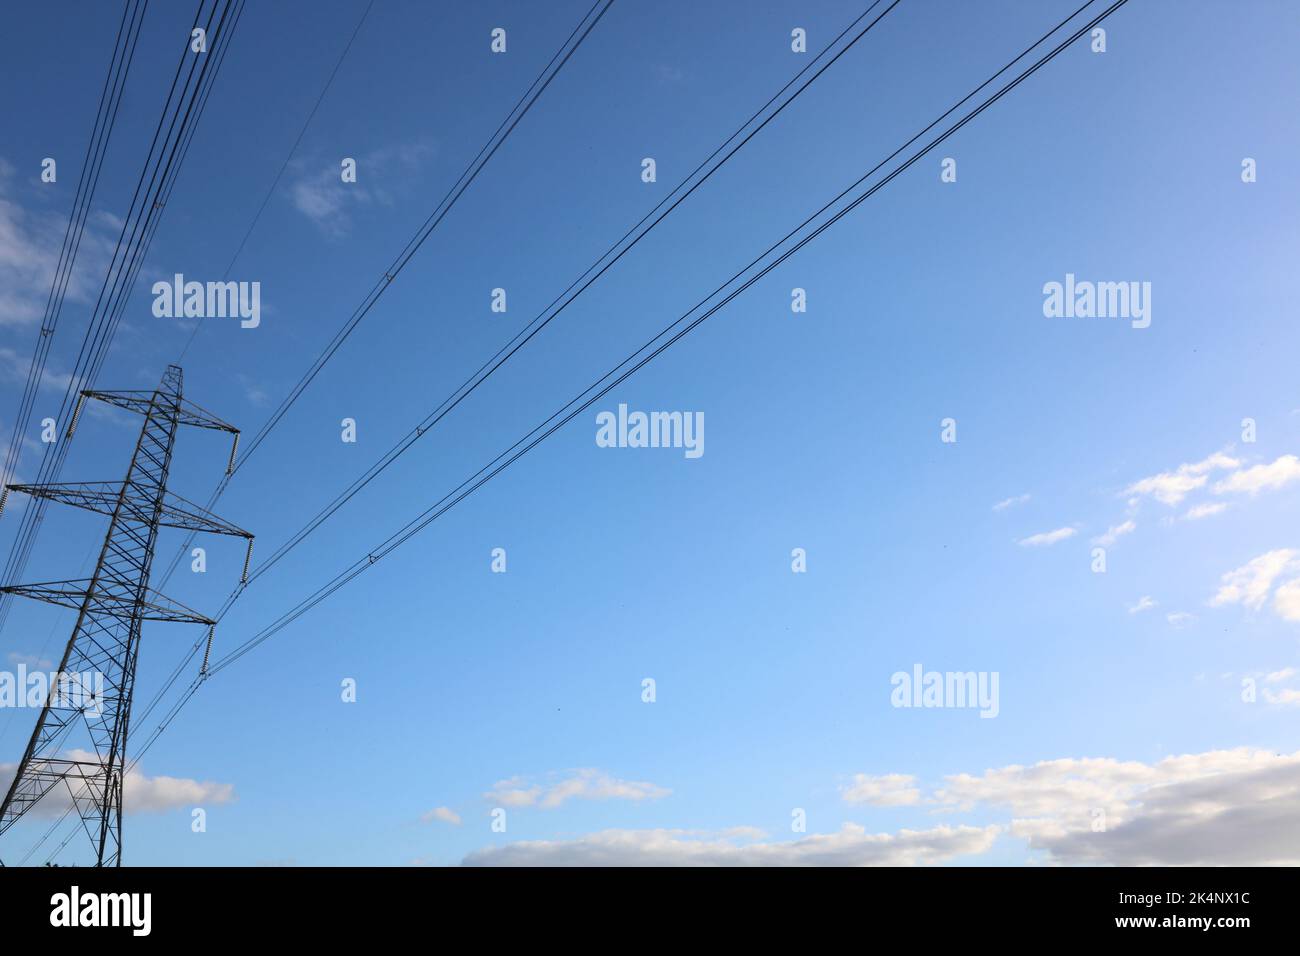 Electricity pylon against deep blue sky with space for copy Stock Photo